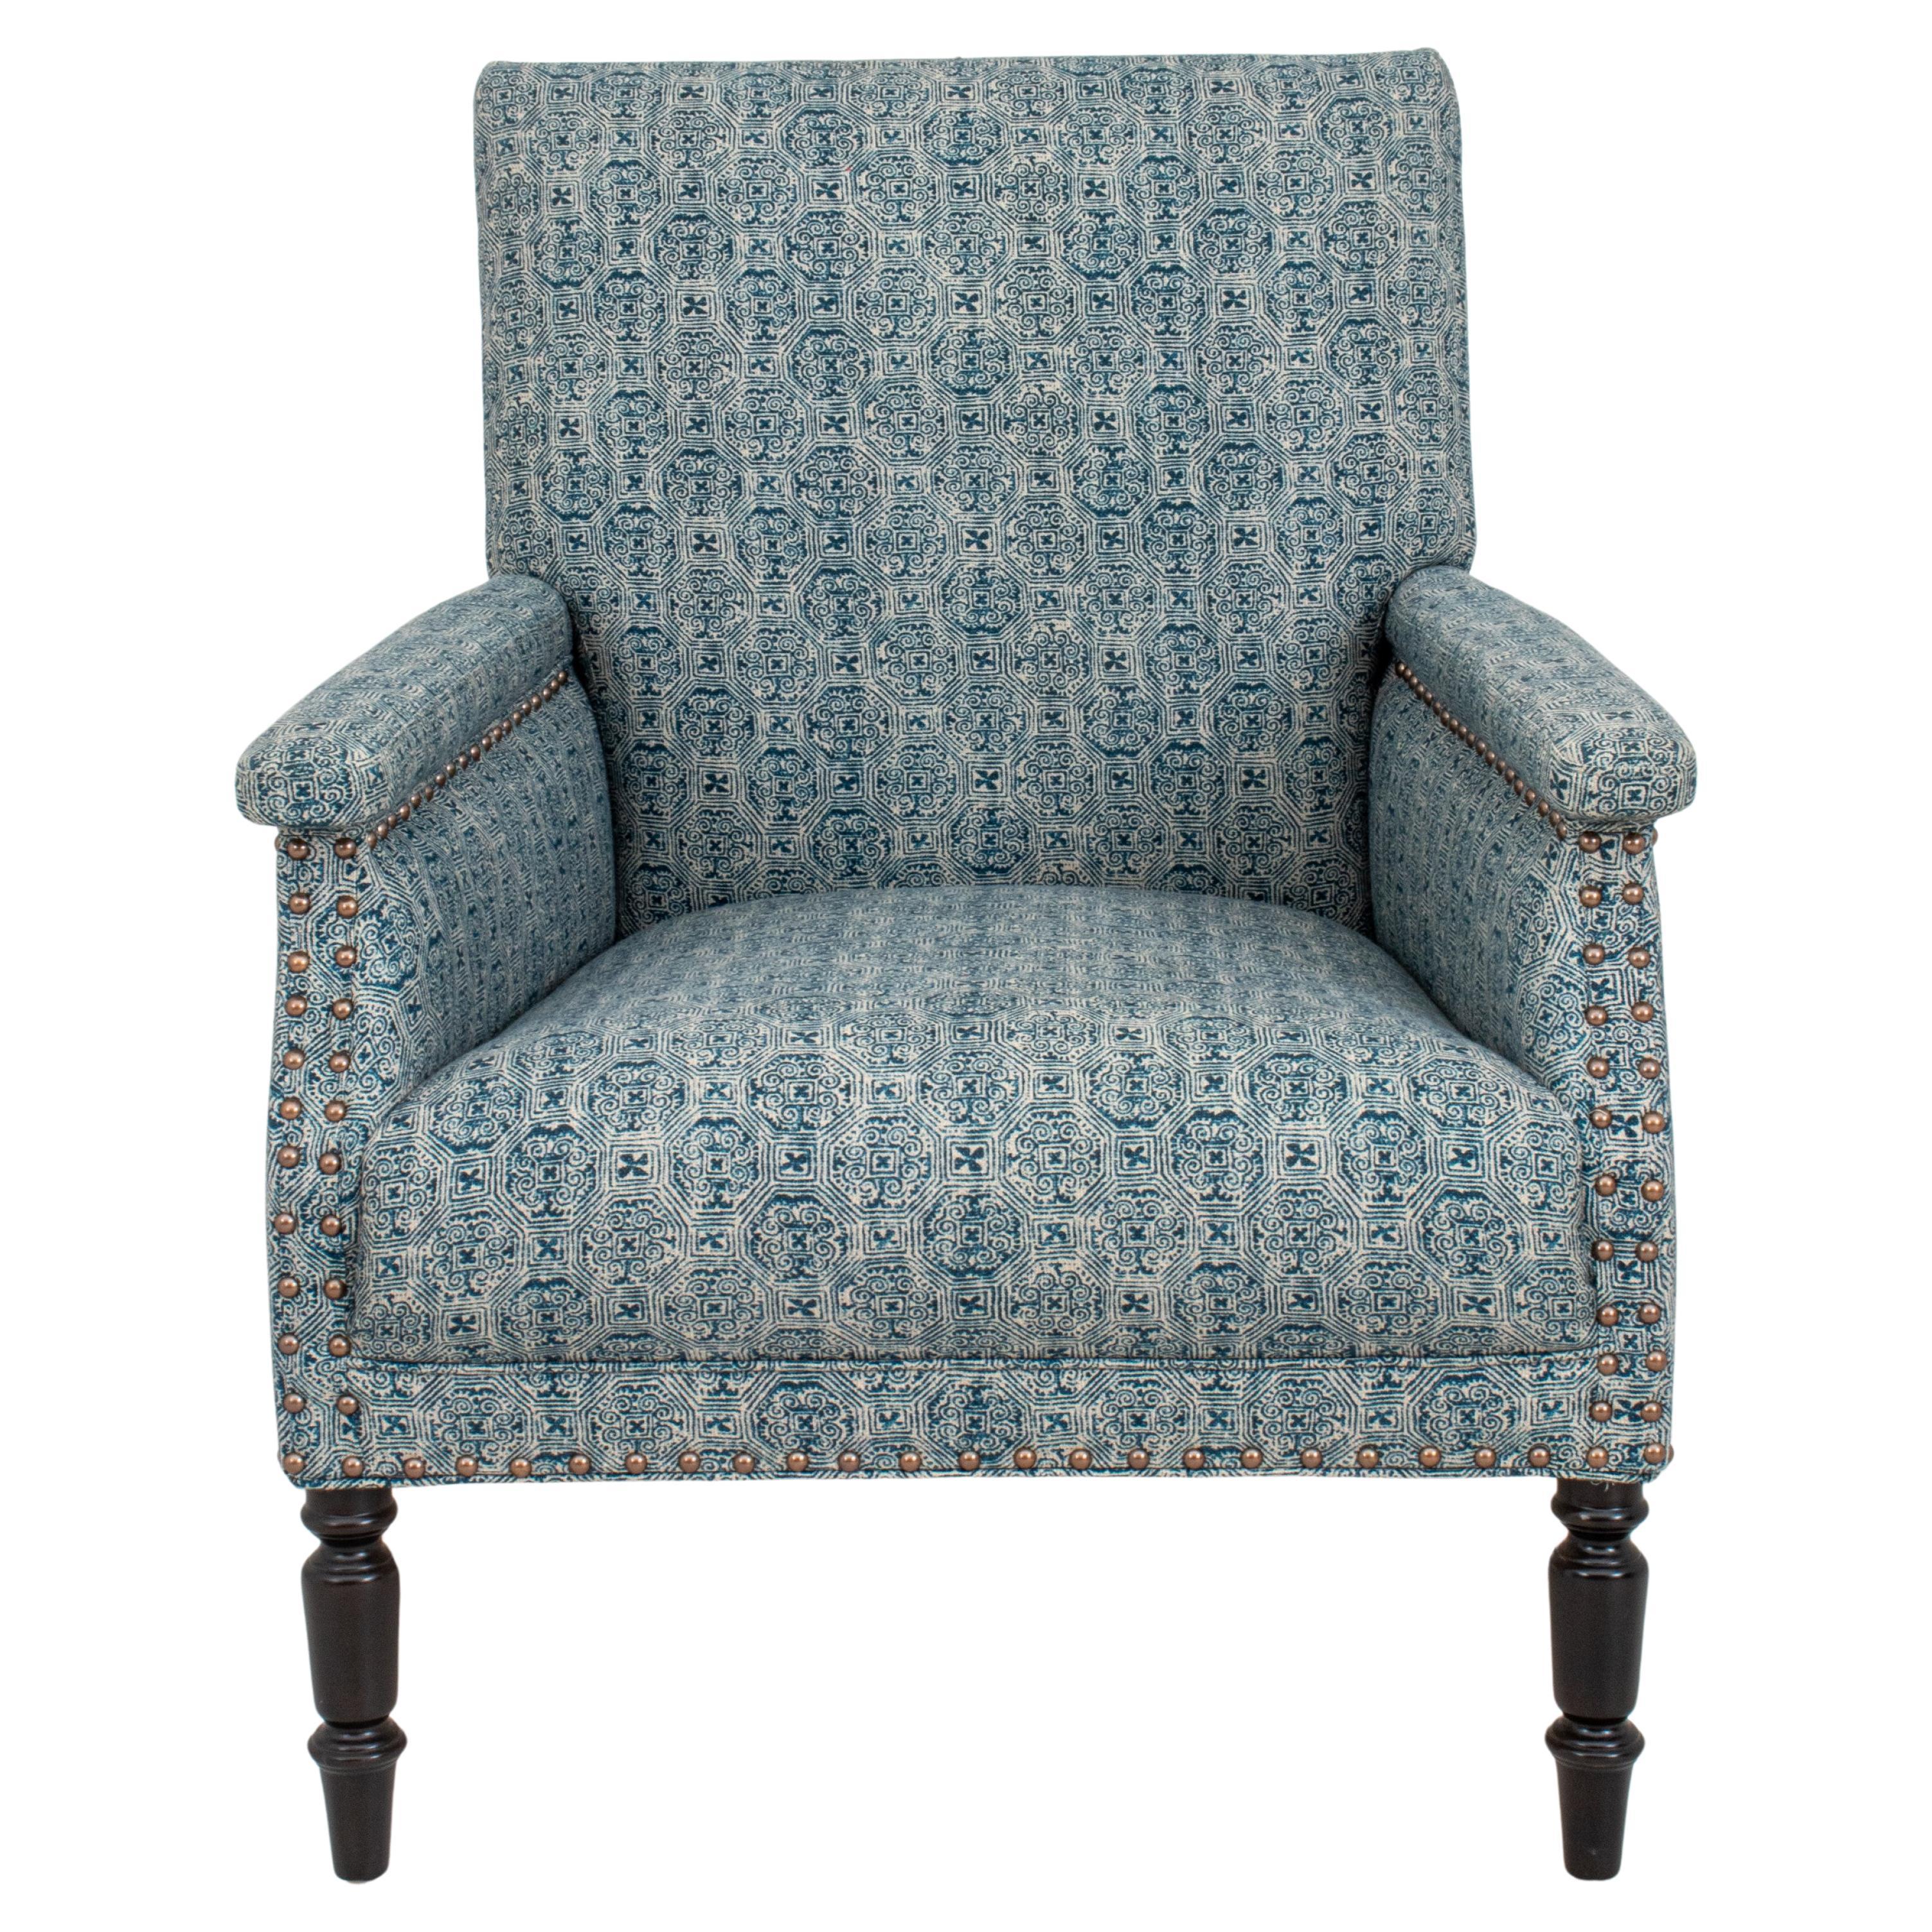 William IV Style Upholstered Library Chair, 20th C